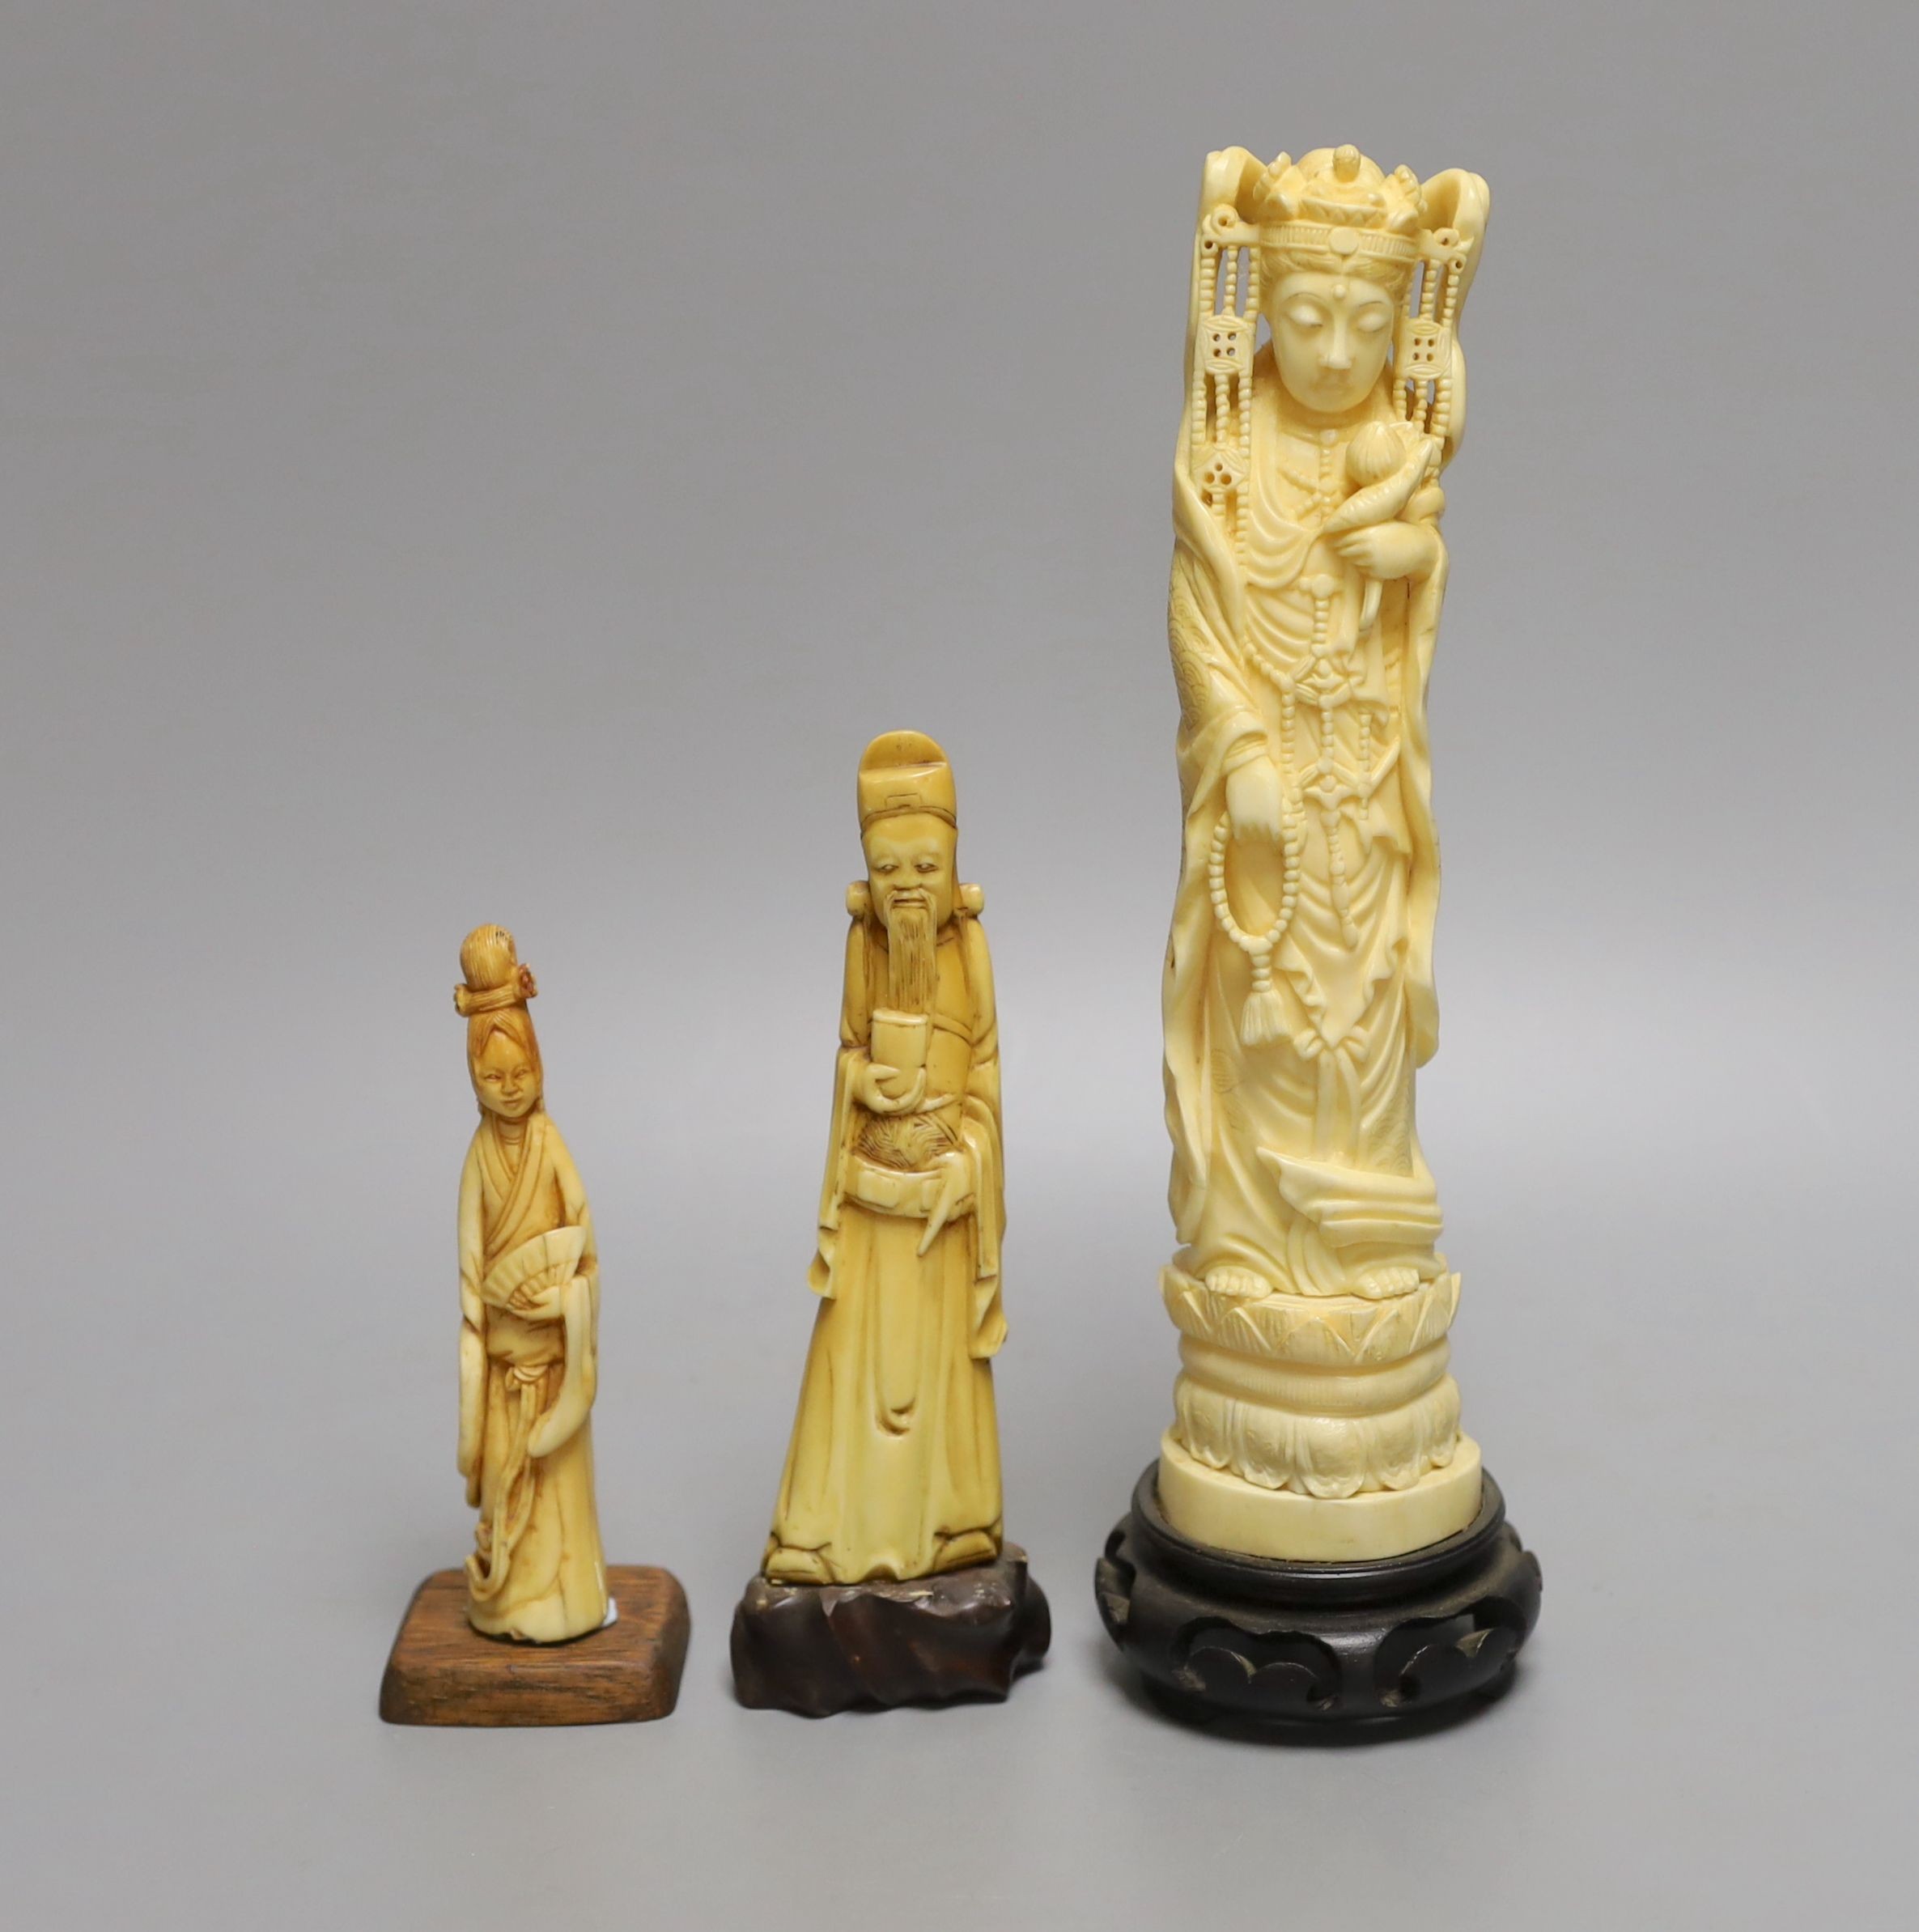 A Japanese walrus ivory figure of Kwannon and two Chinese hippo tusk? figures, early 20th century (3), wood stands, tallest 24cm (including base)